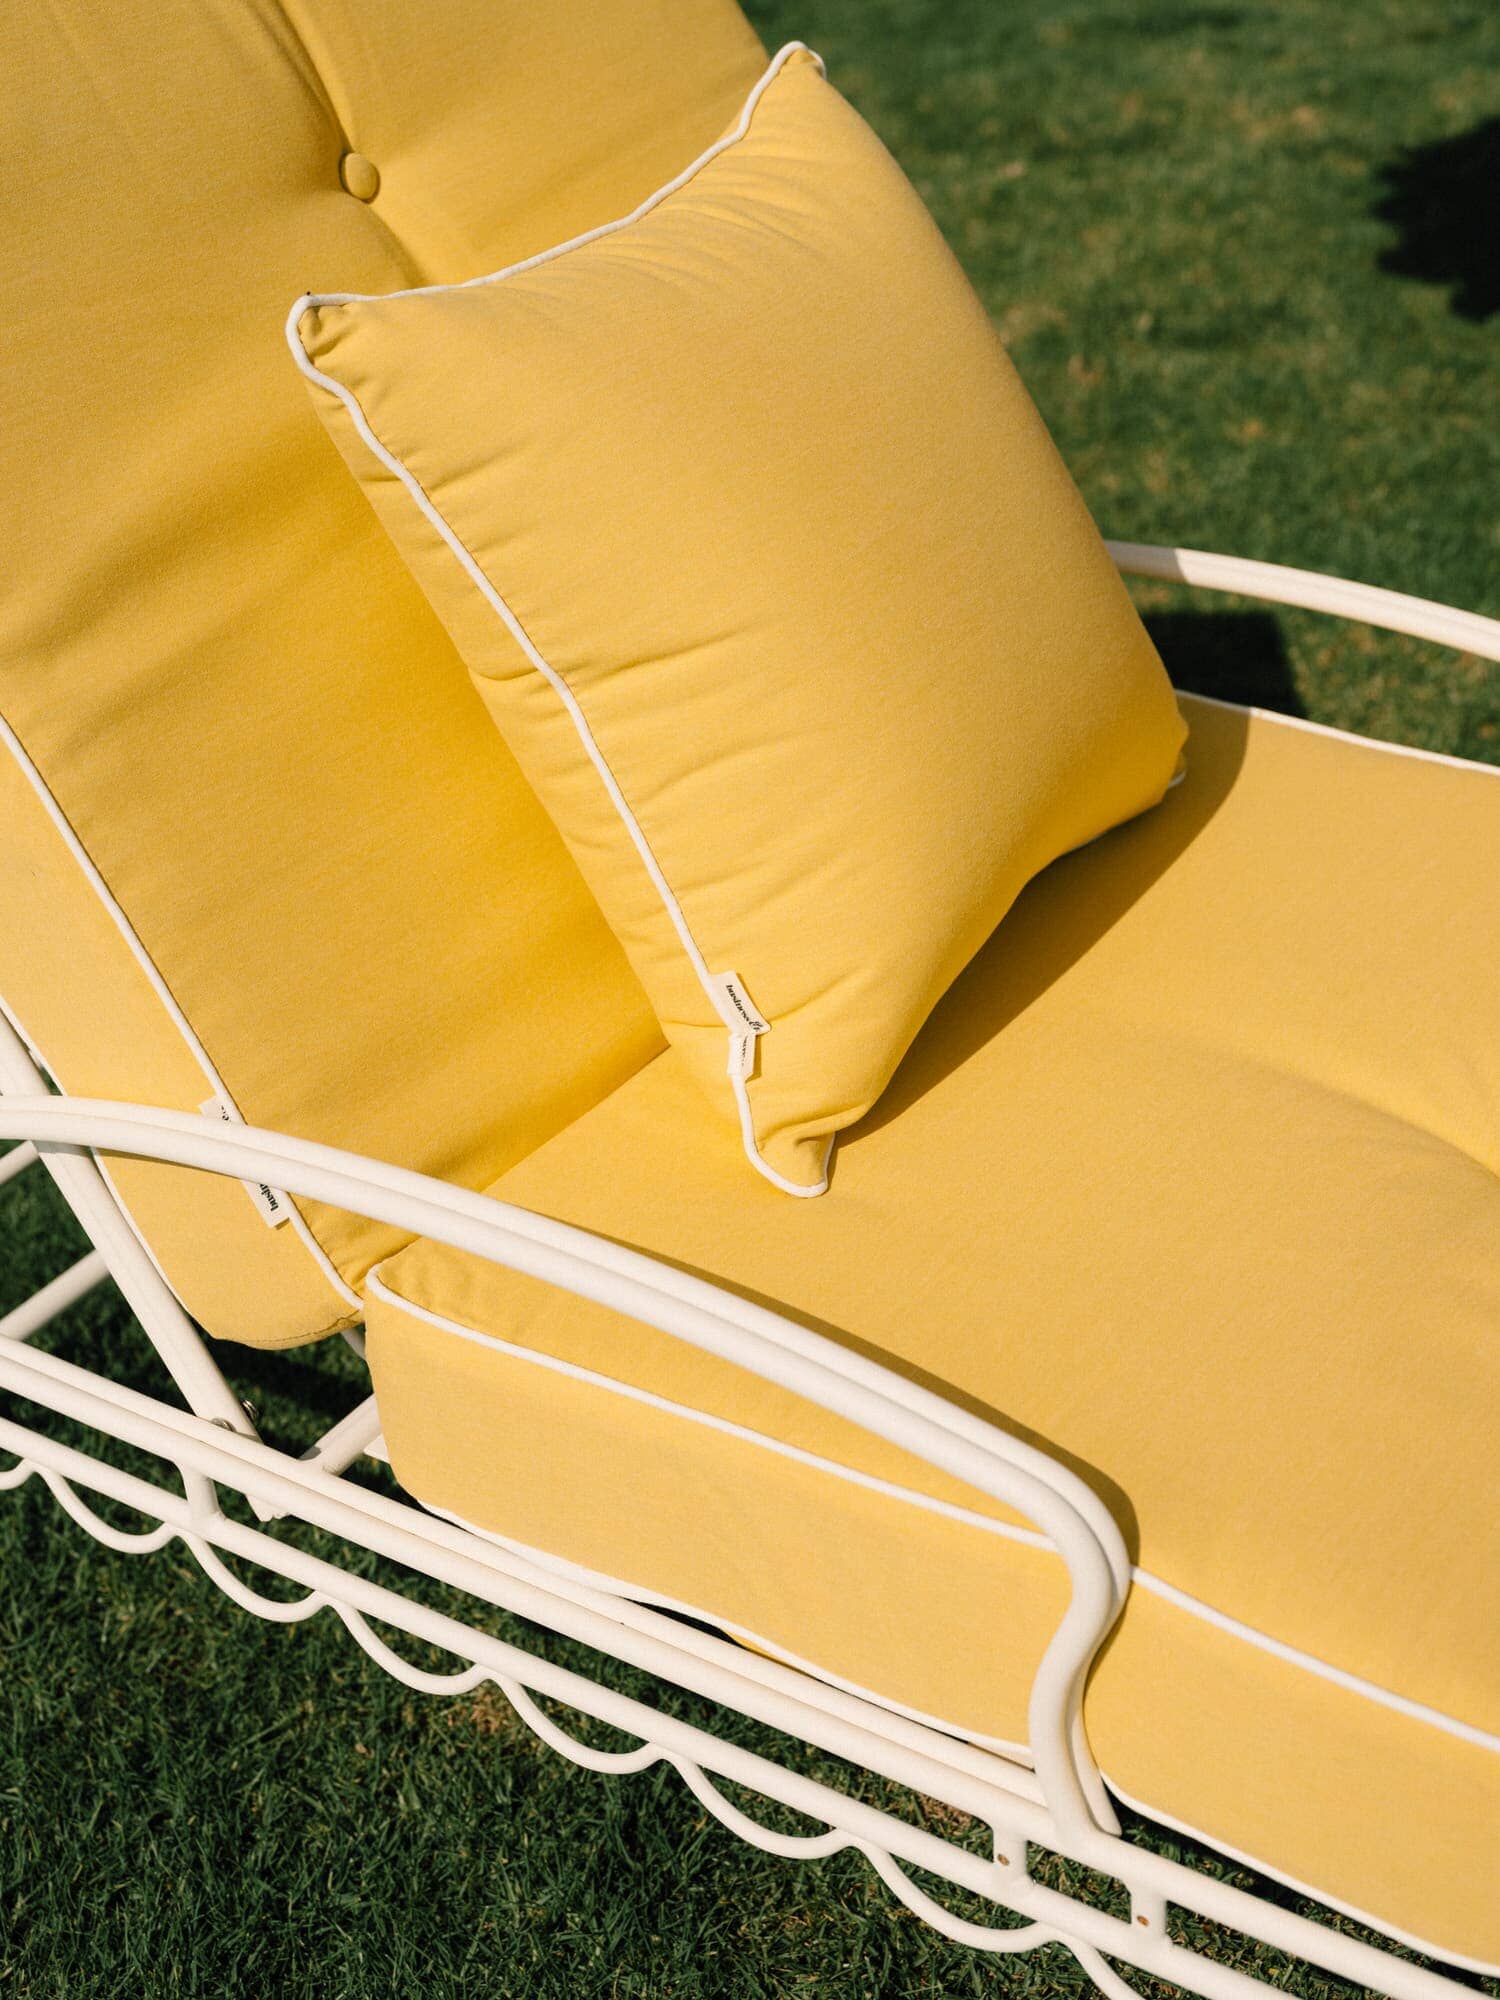 Riviera mimosa sun loungers and umbrella on a grass area